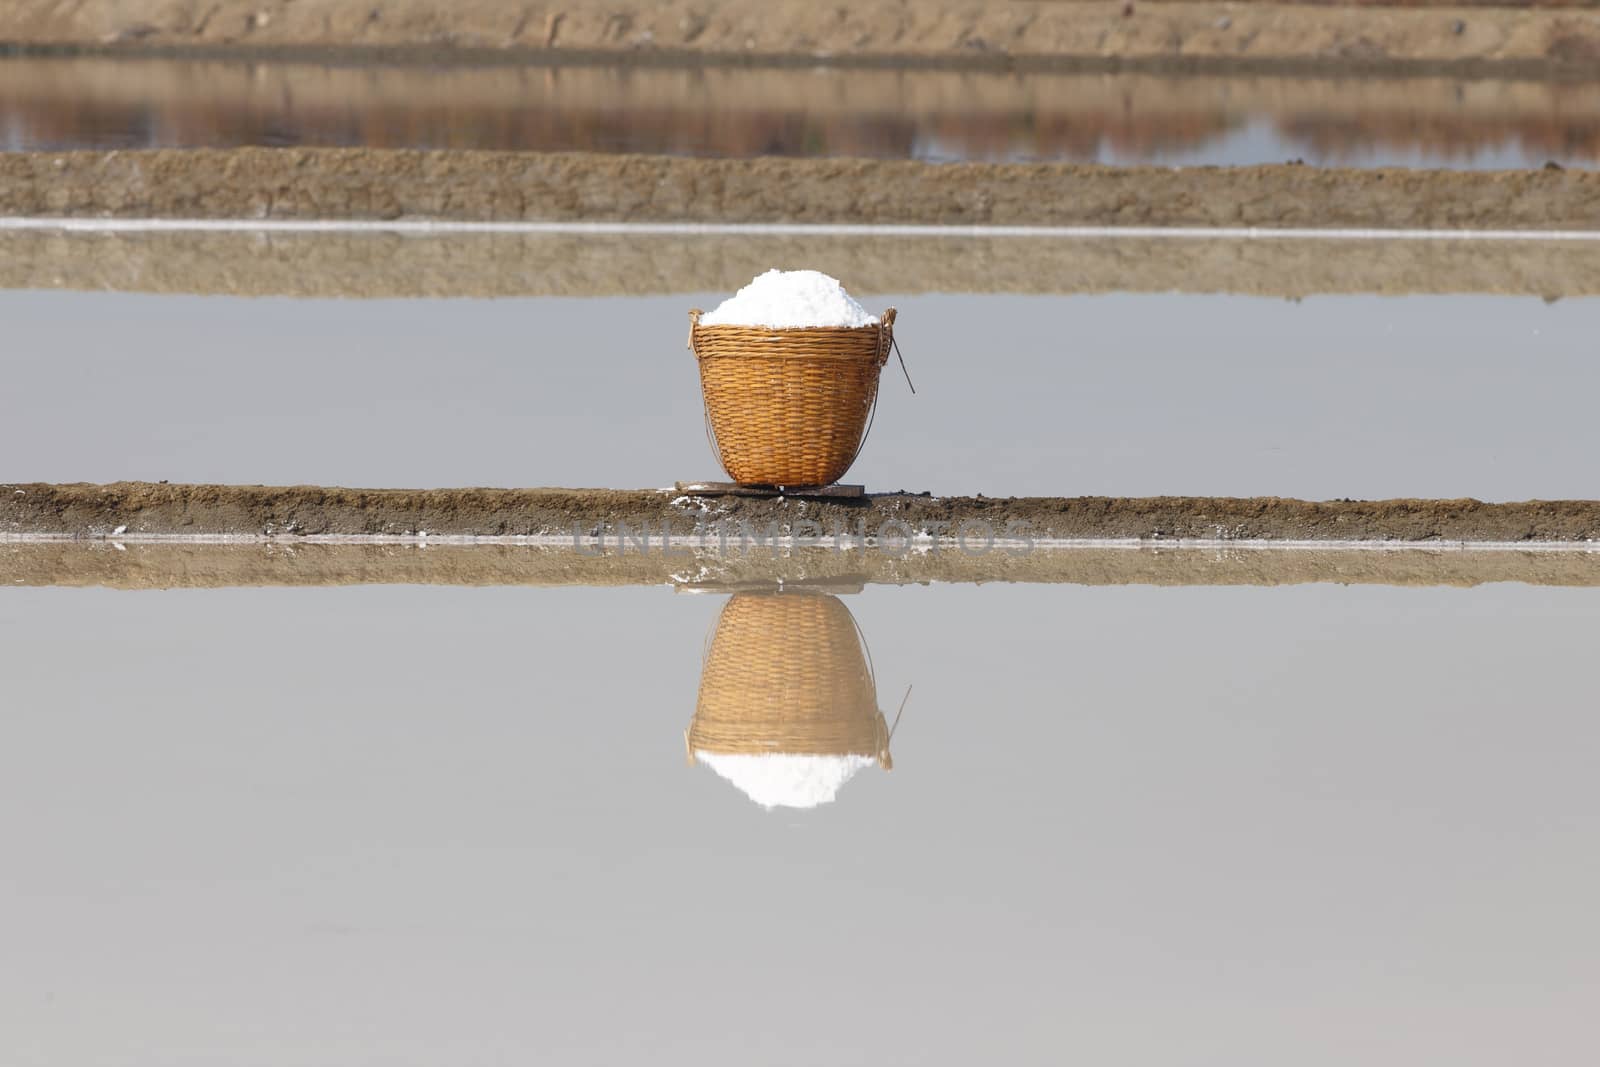 Sea salt in the bamboo basket and its reflection on salt farm.